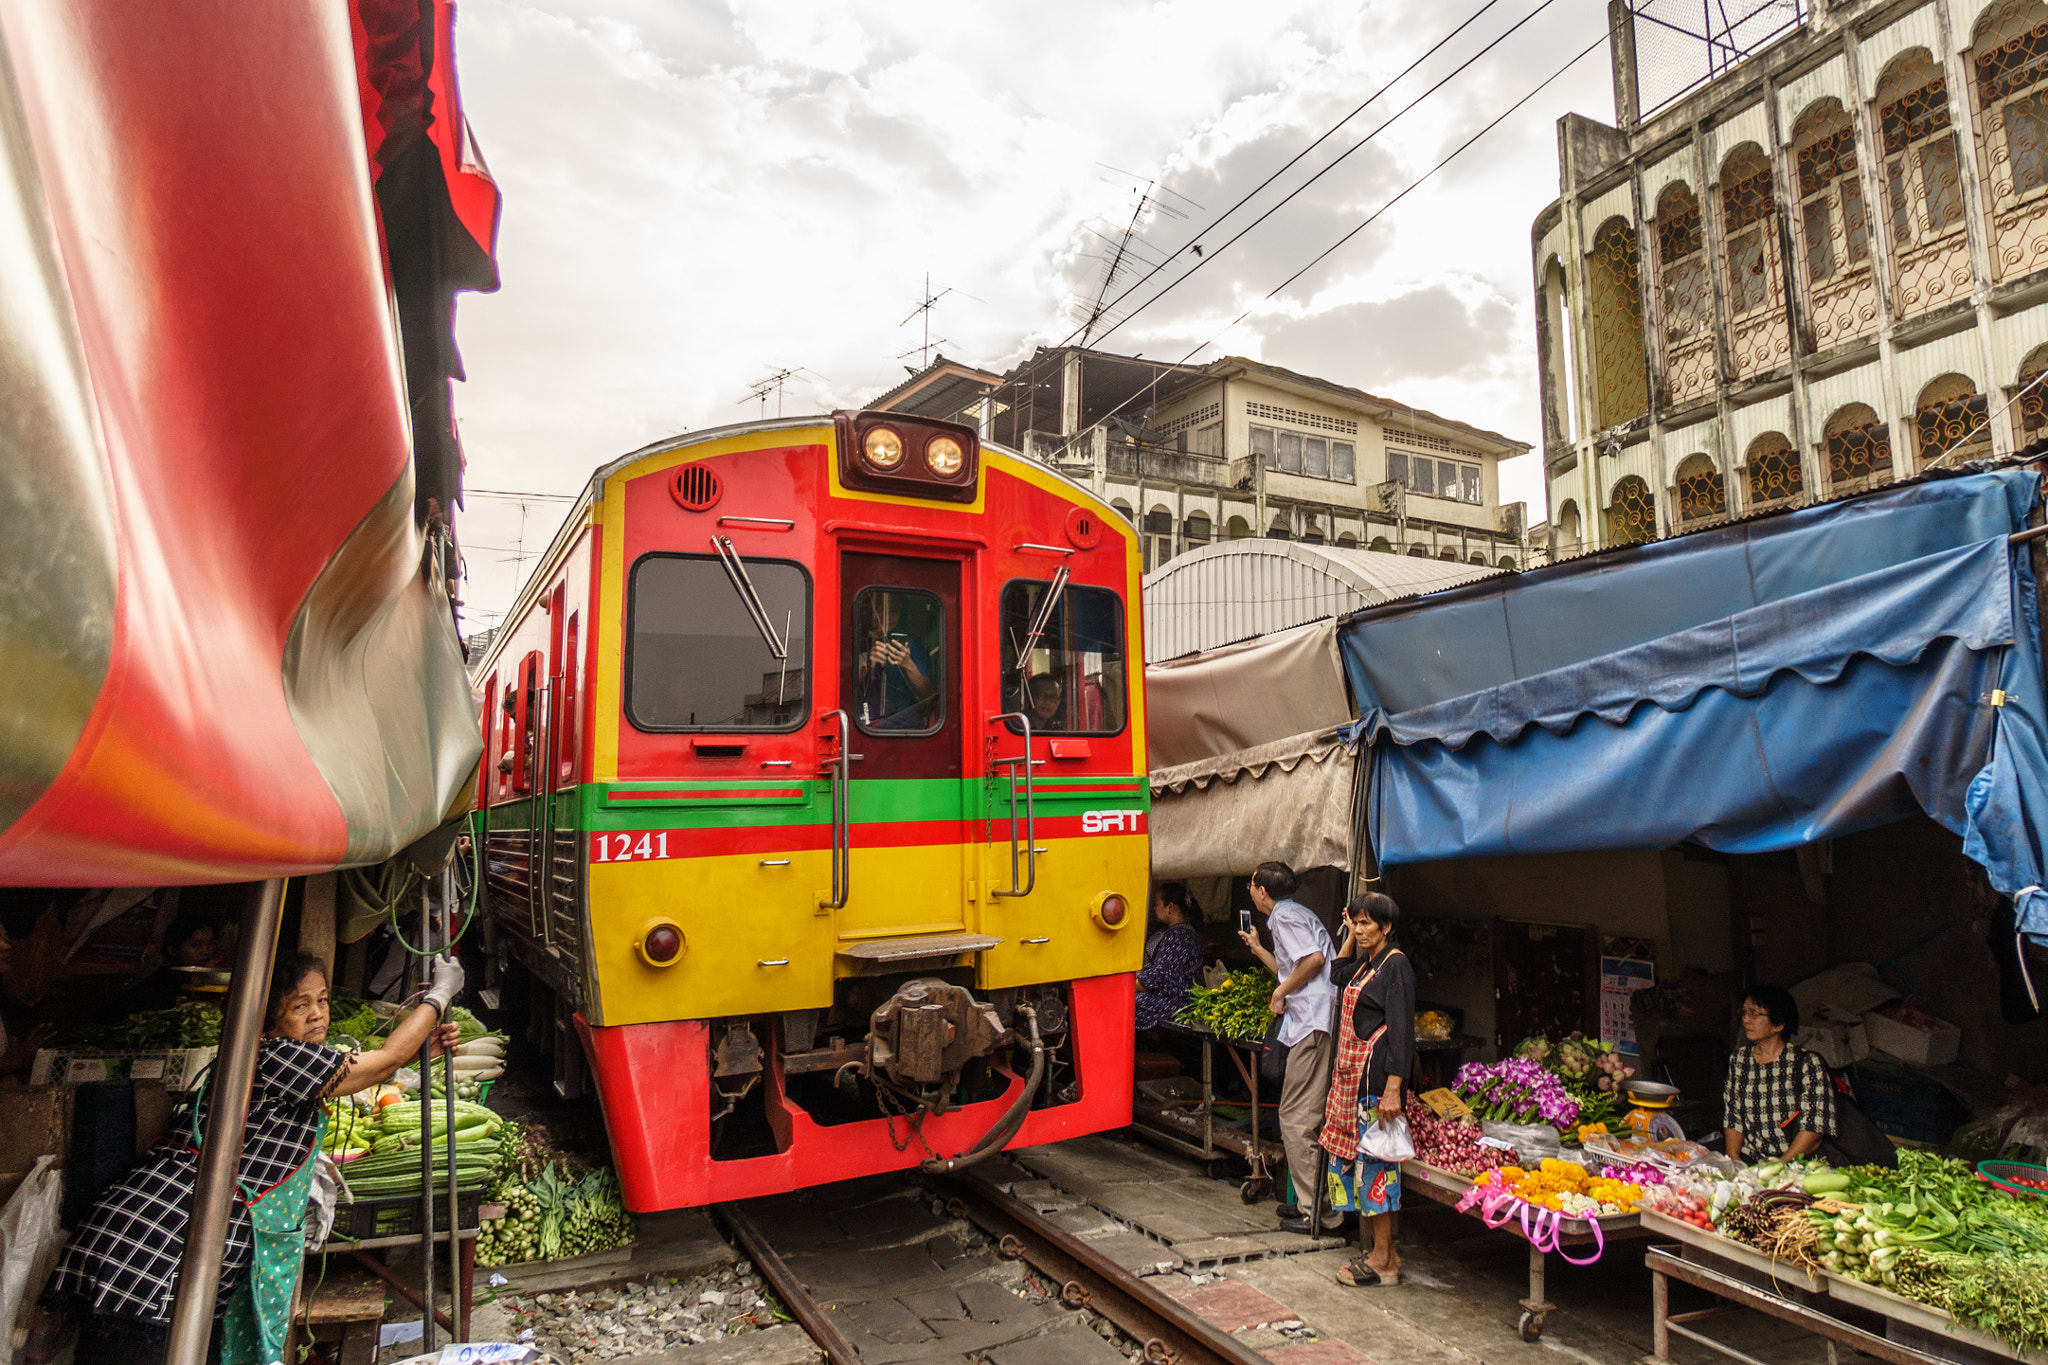 Sony a6500 sample photo. Train in market photography